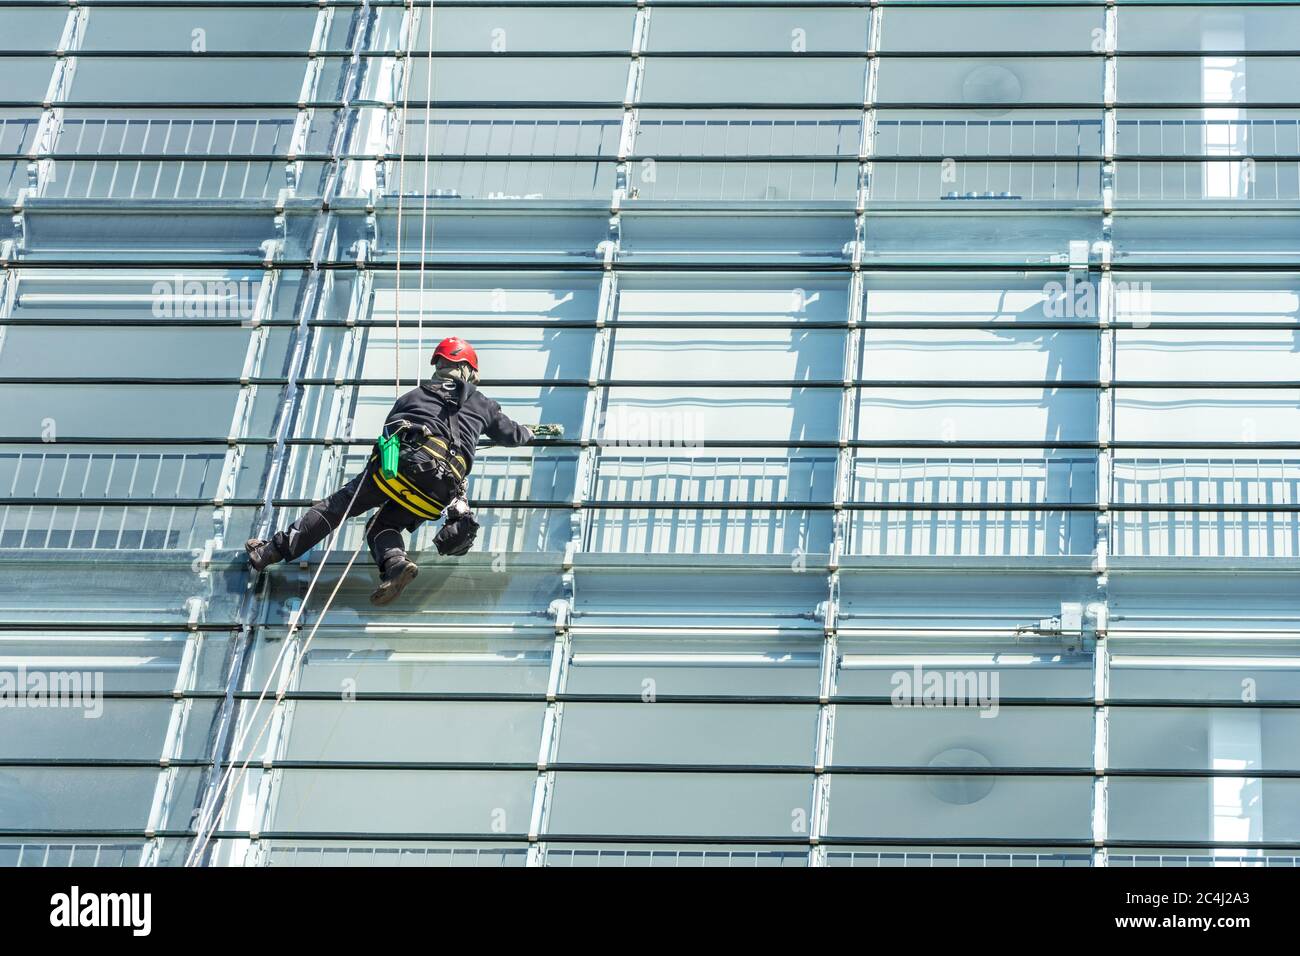 Window cleaner with safety equipment on the shiny glass facade of a skyscraper Stock Photo